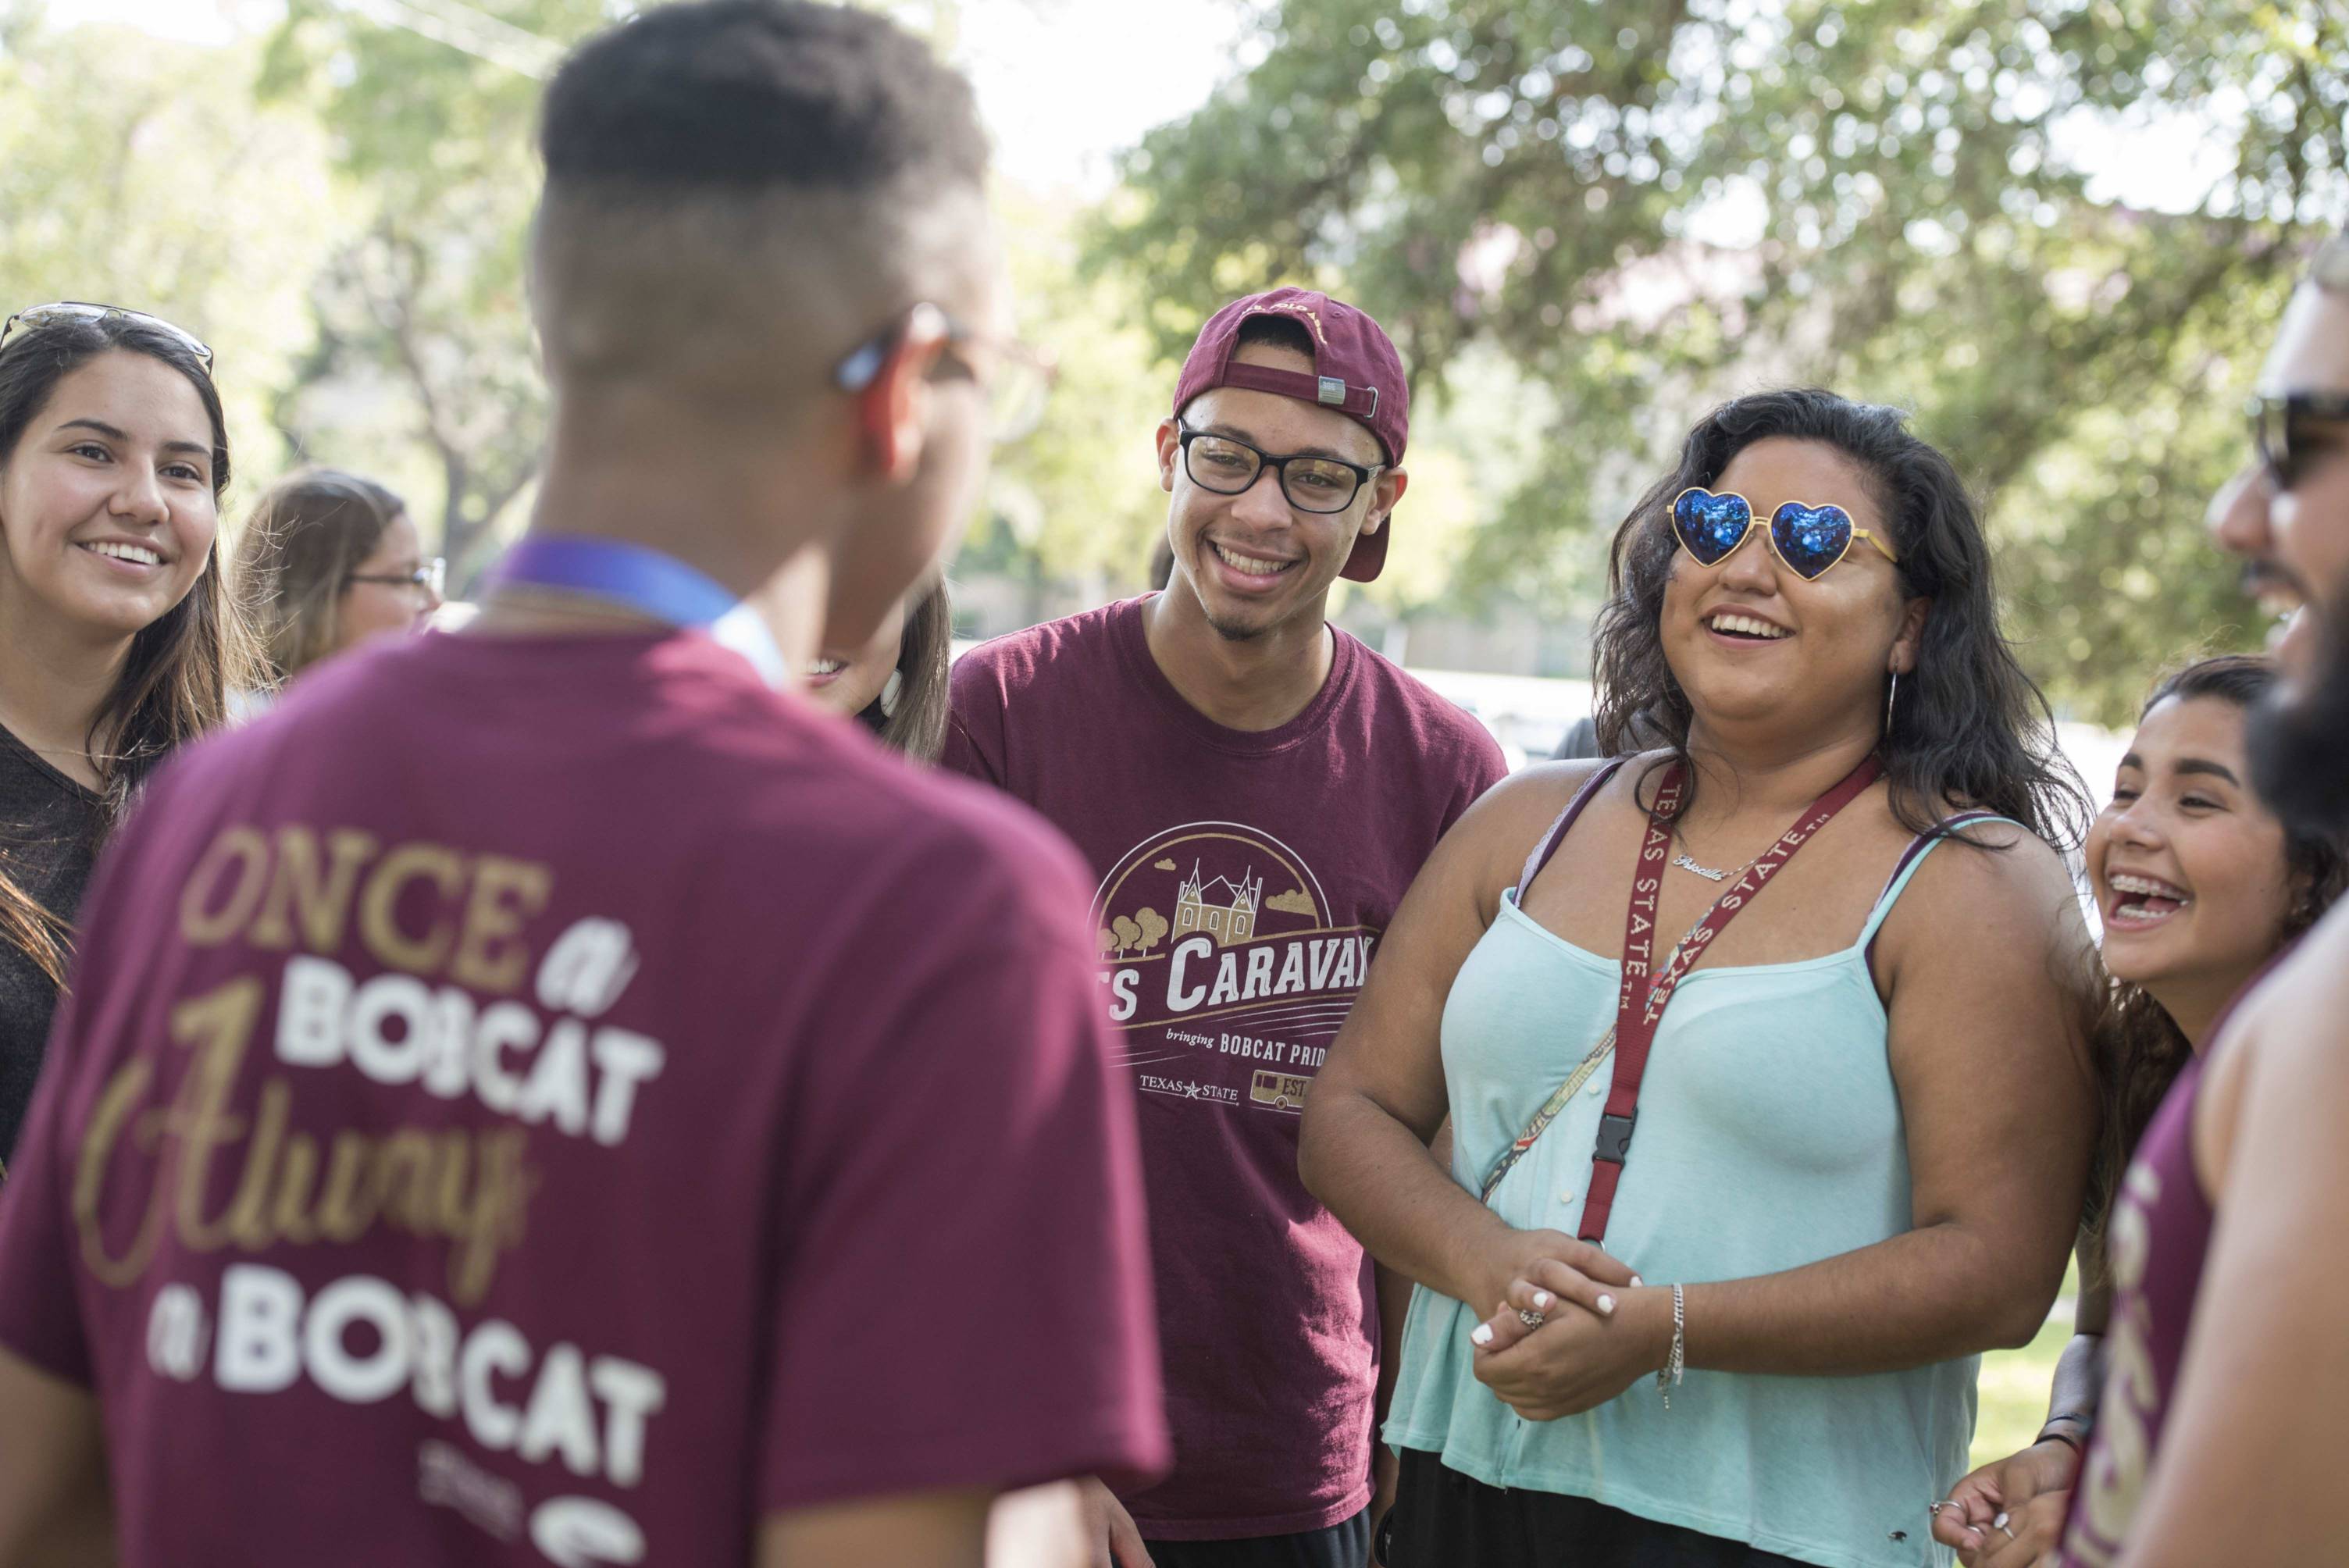 a group of students in texas state attire and gear smile